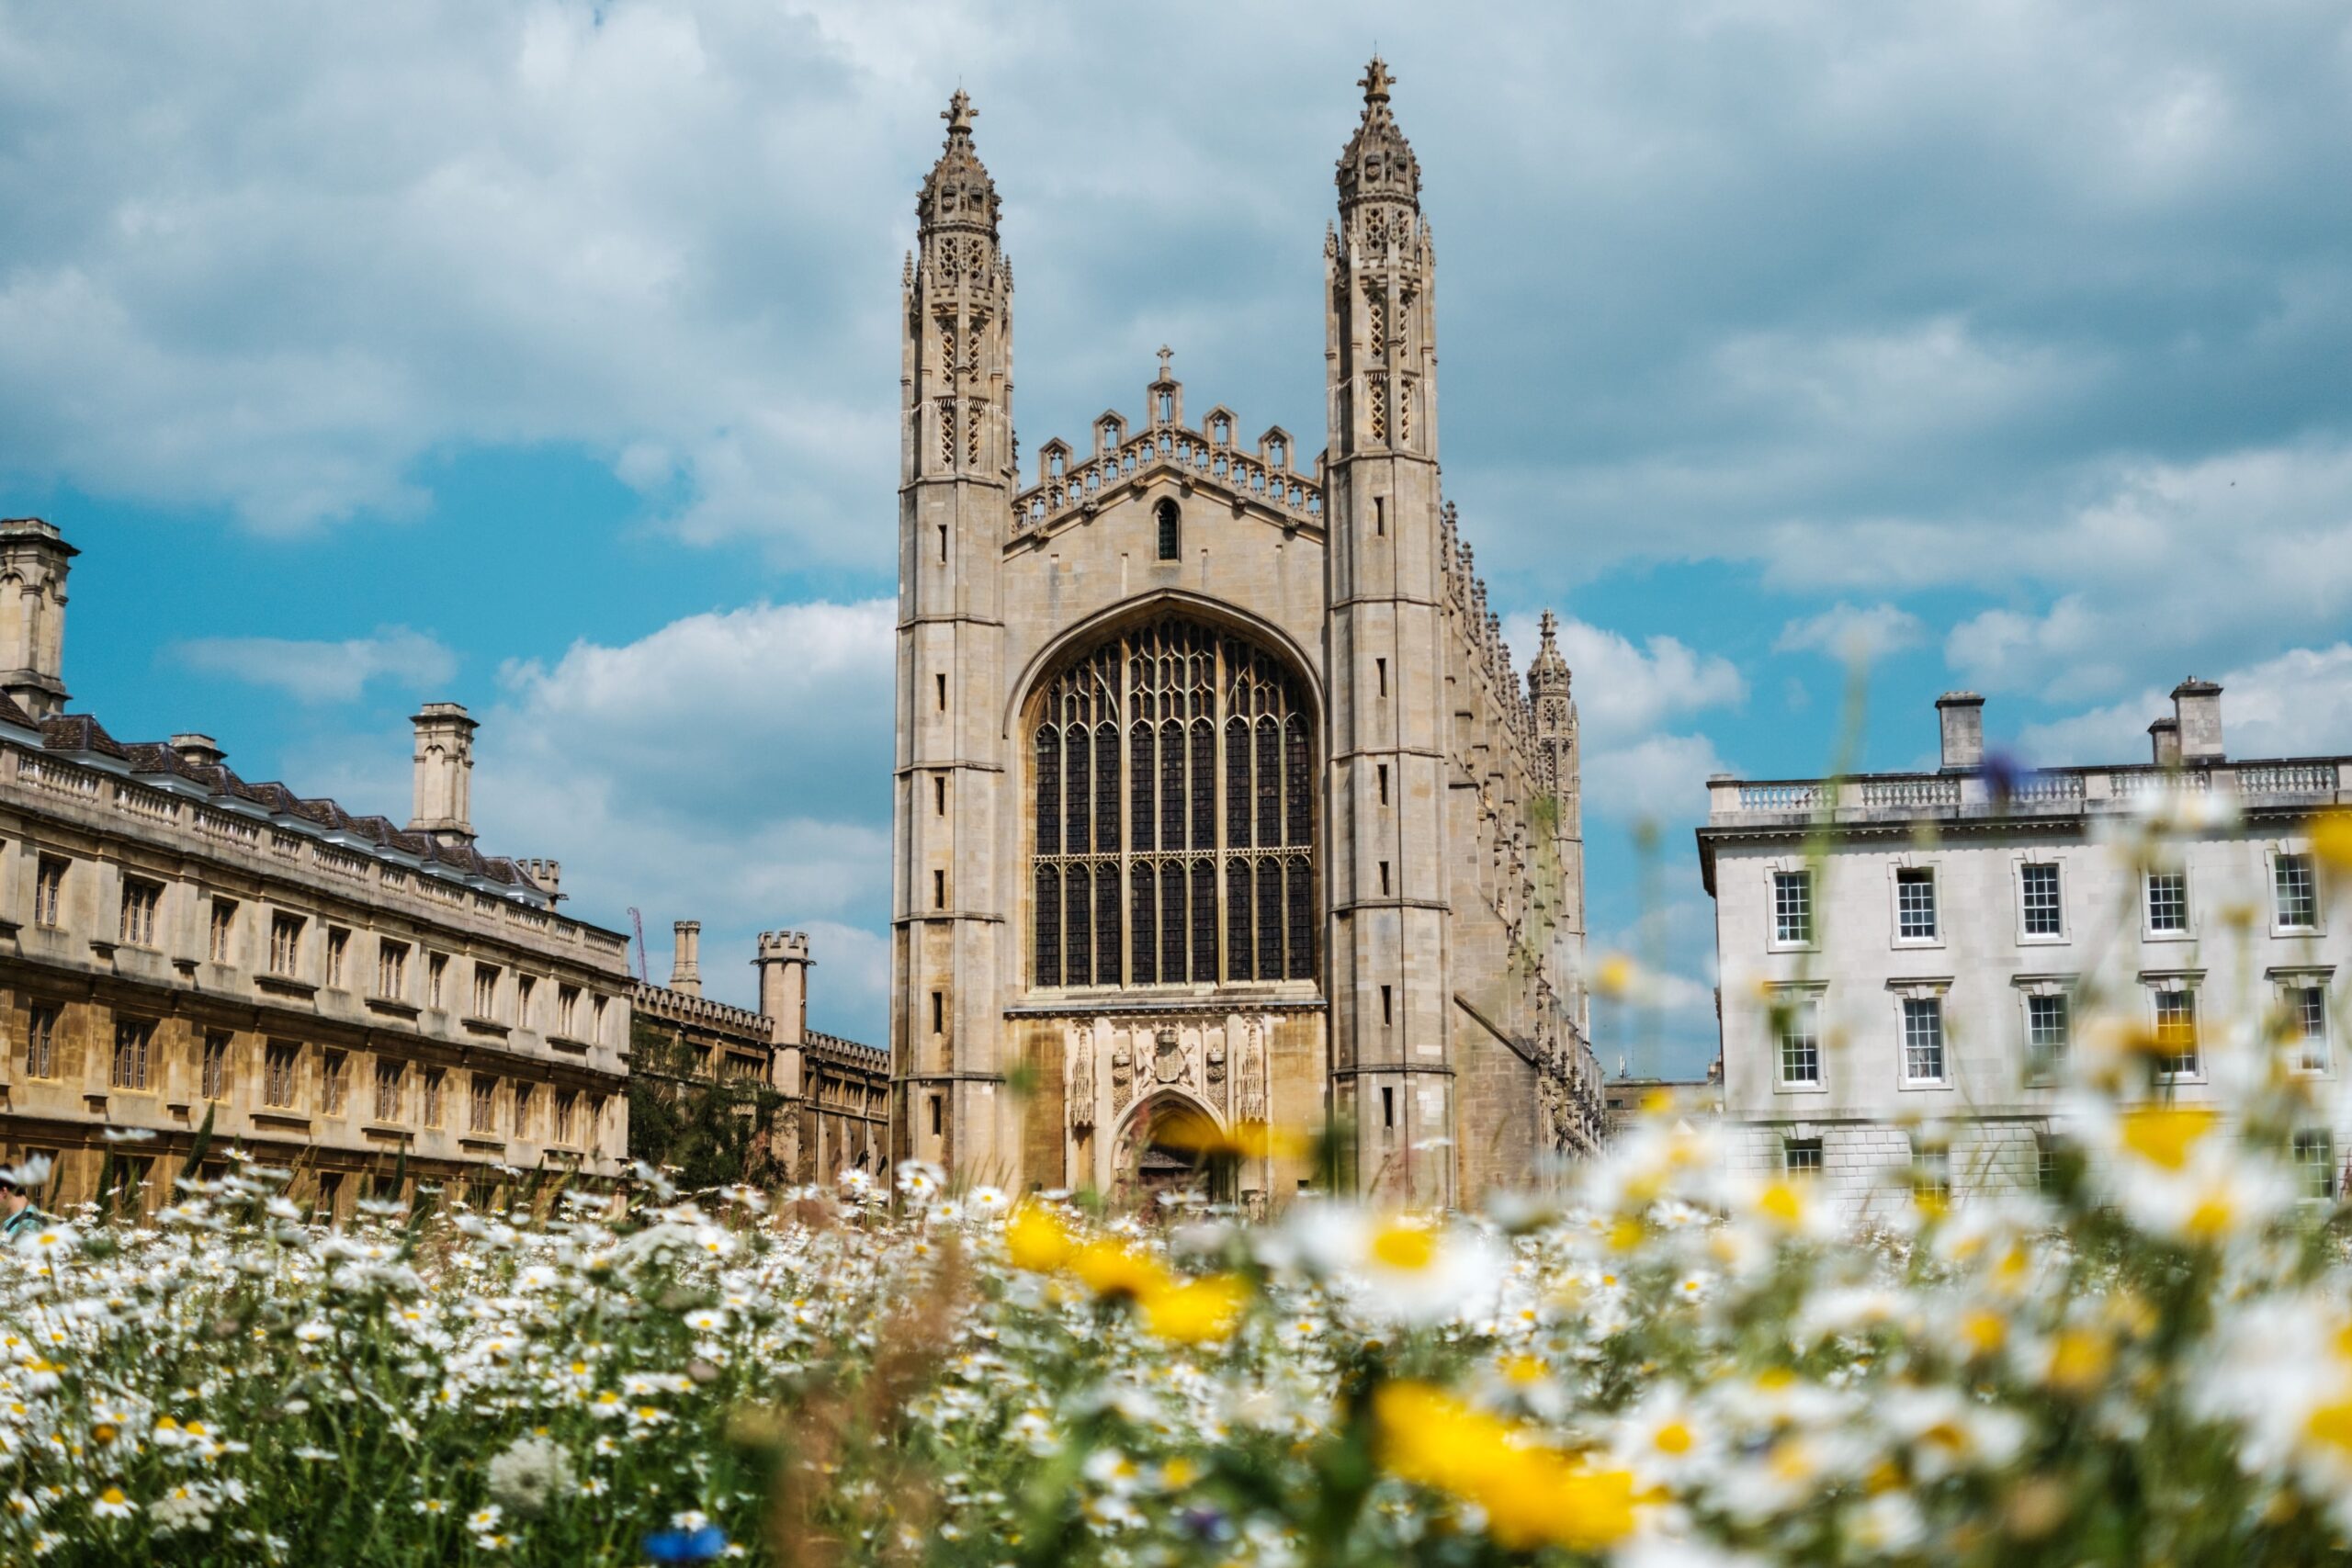 King's College Chapel in Cambridge seen from a meadow of wild summer flowers.